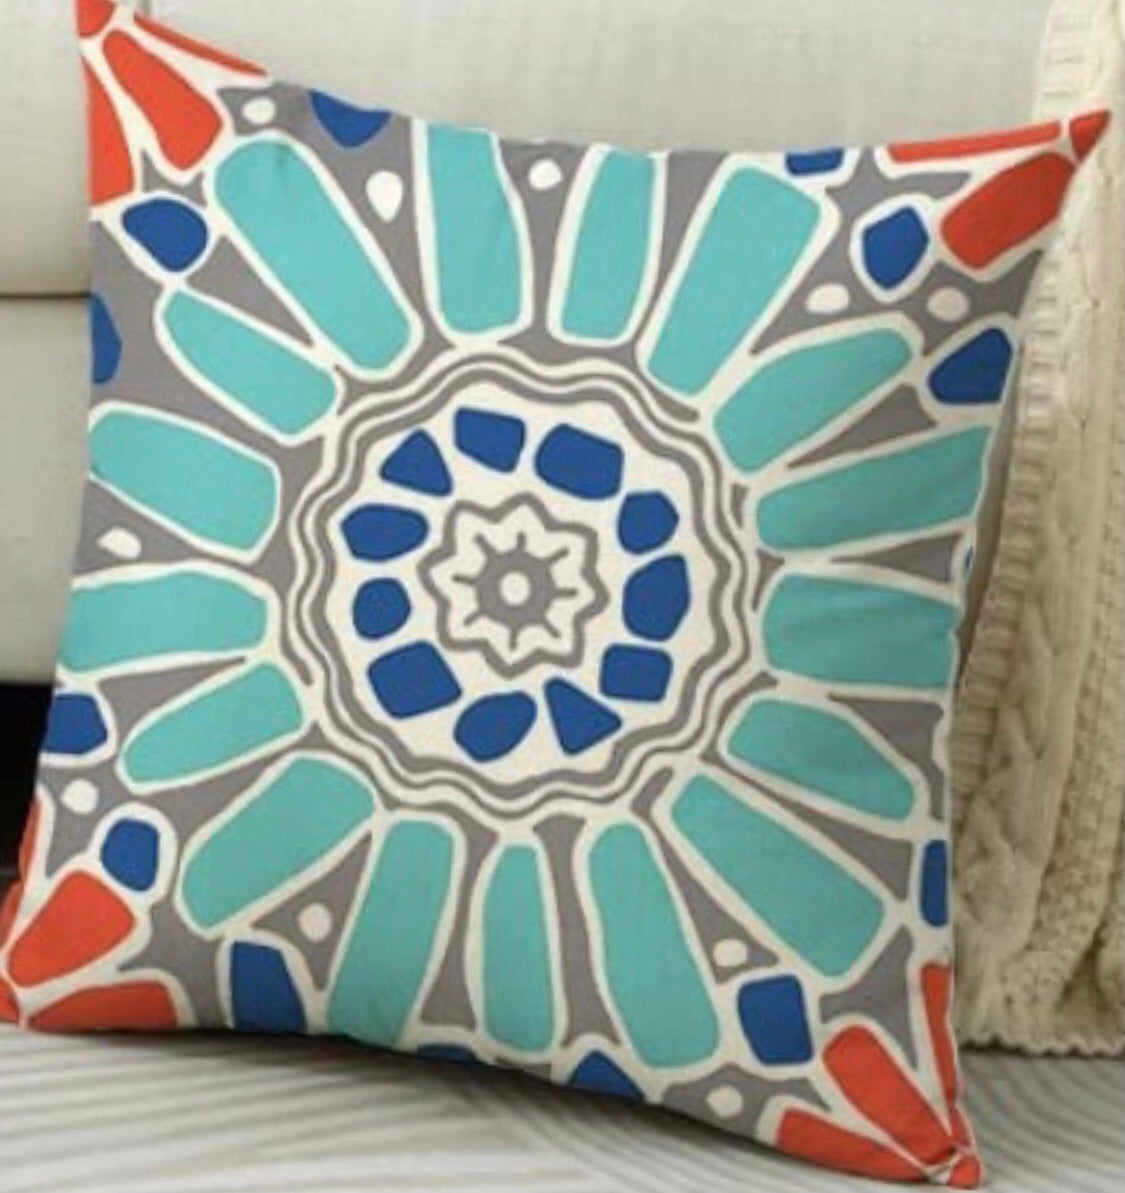 50% Discount Outdoor Cushion Covers